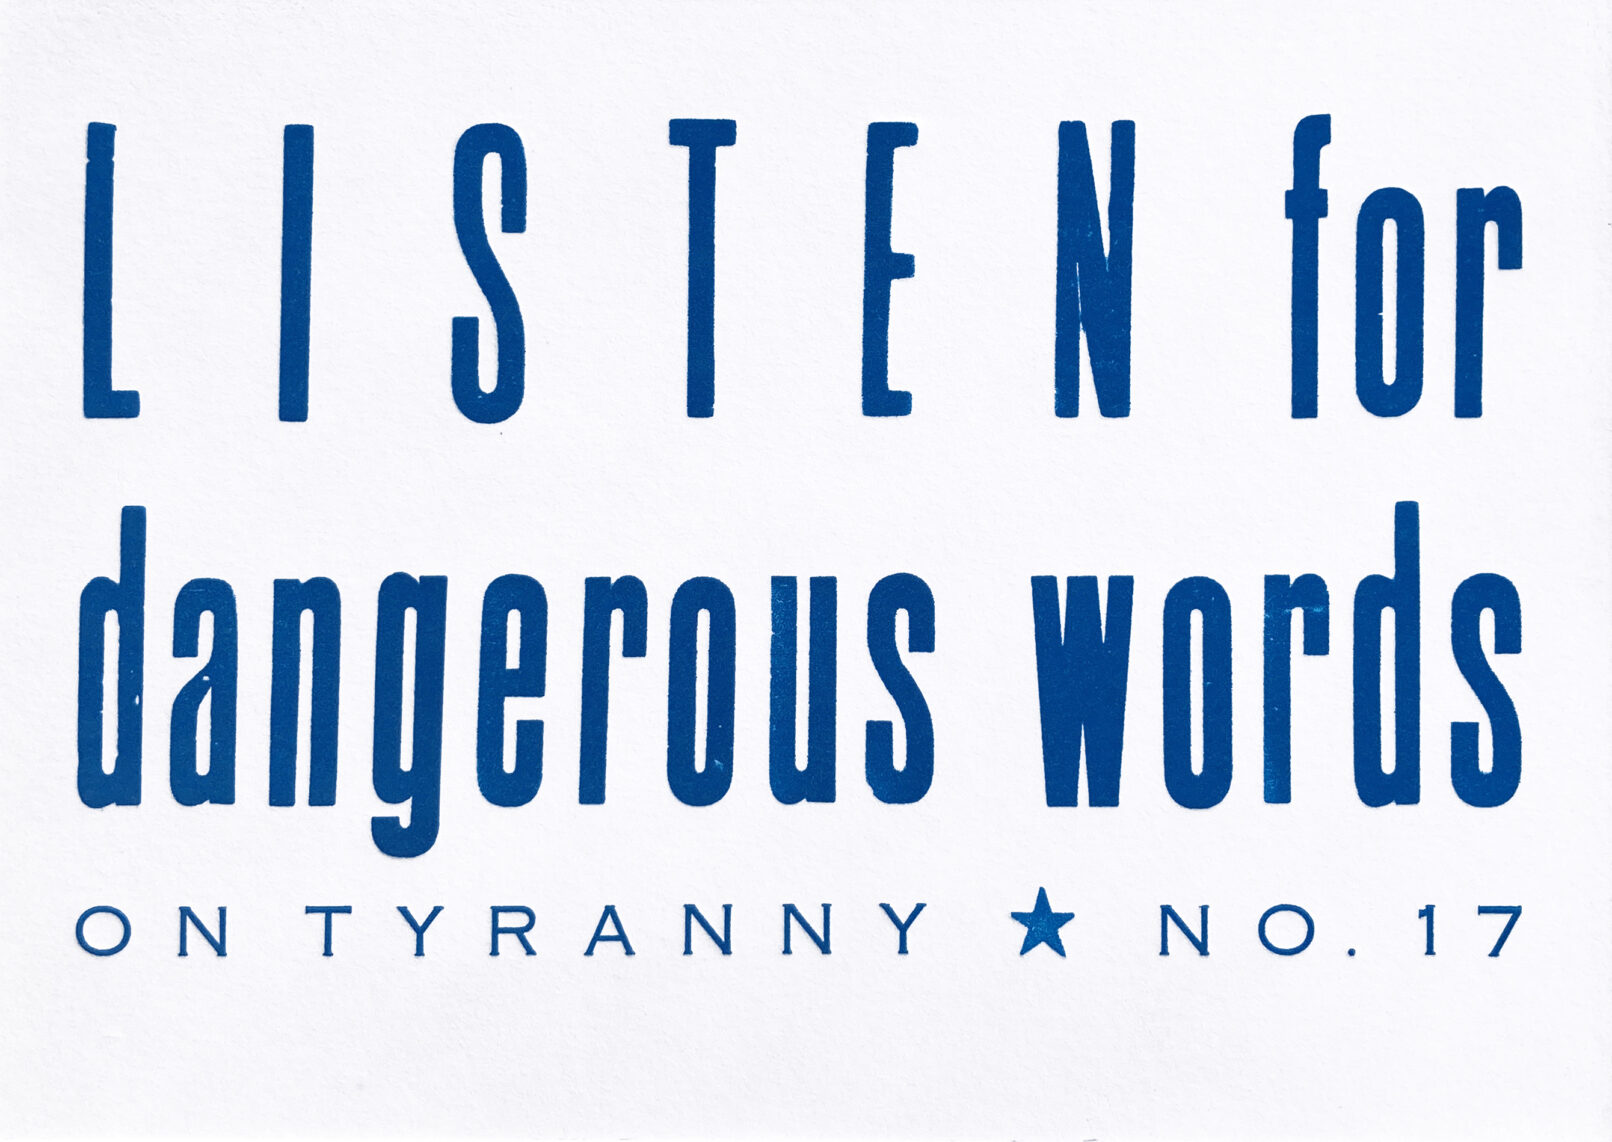 Letterpress print in blue ink on white paper with text that reads "Listen for Dangerous Words On Tyranny No. 17"